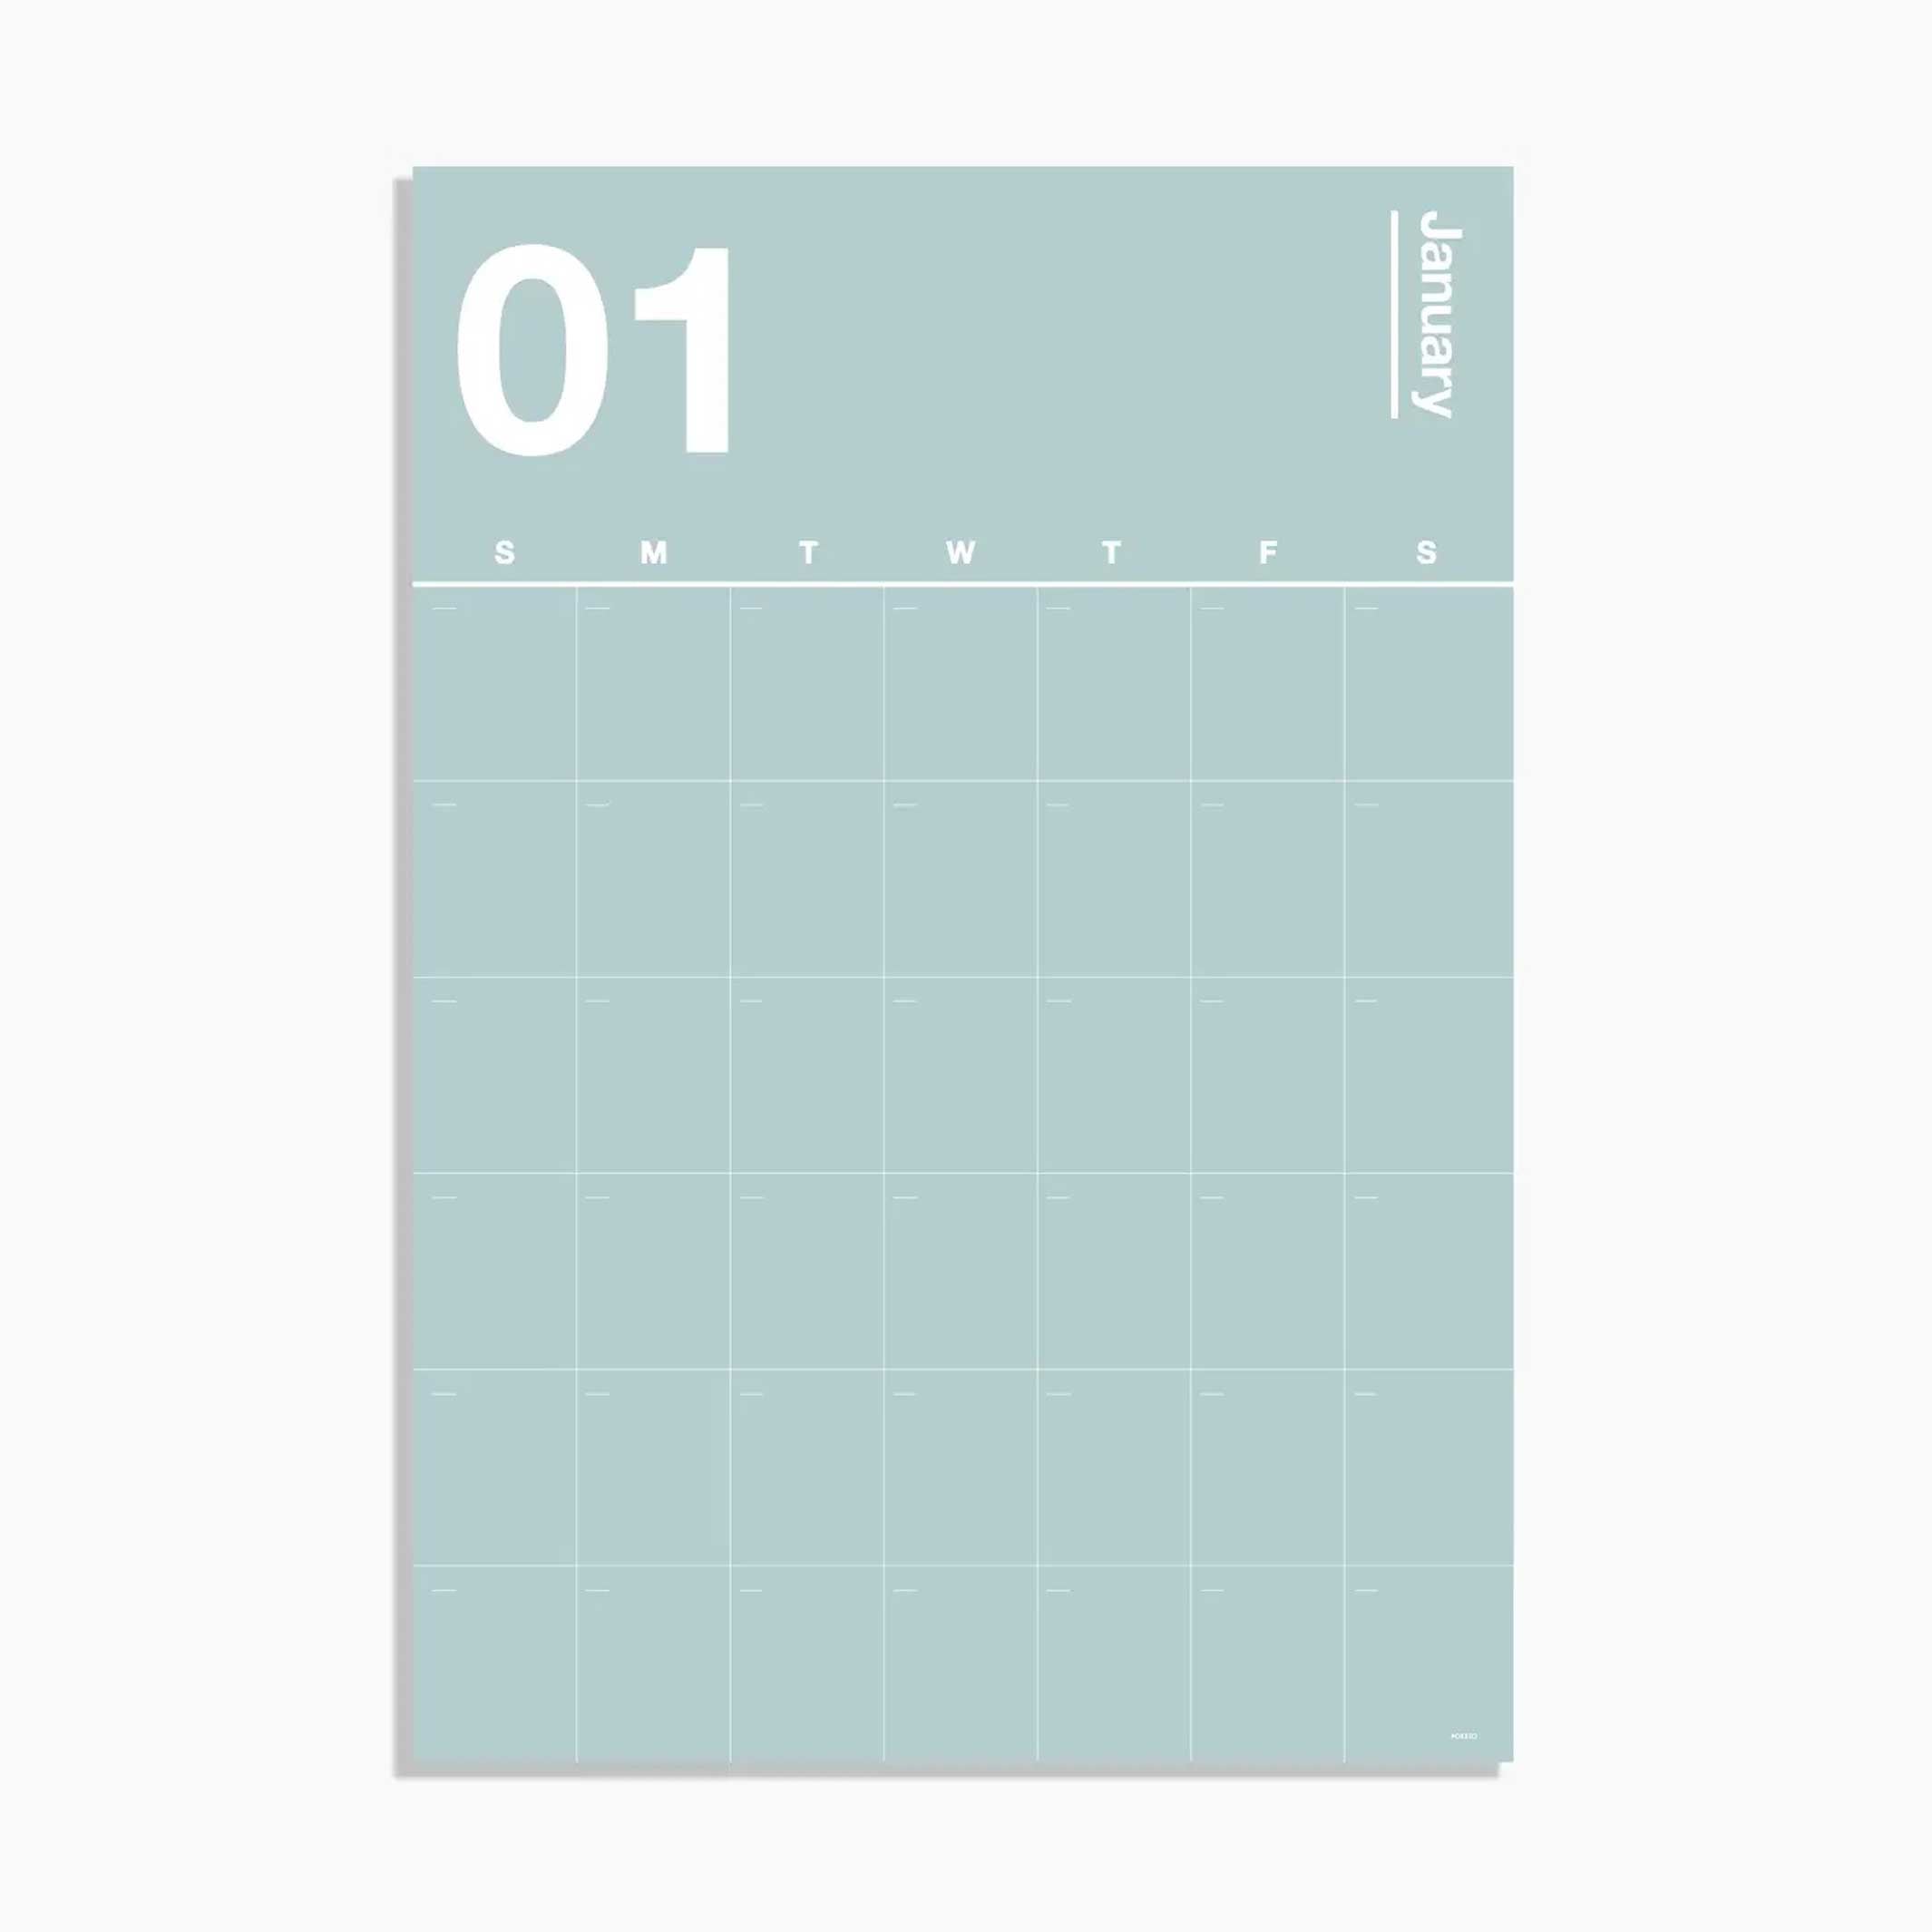 SPECTRUM | Earthy-colored & open-dated WALL PLANNER | 77x52 cm | Poketo